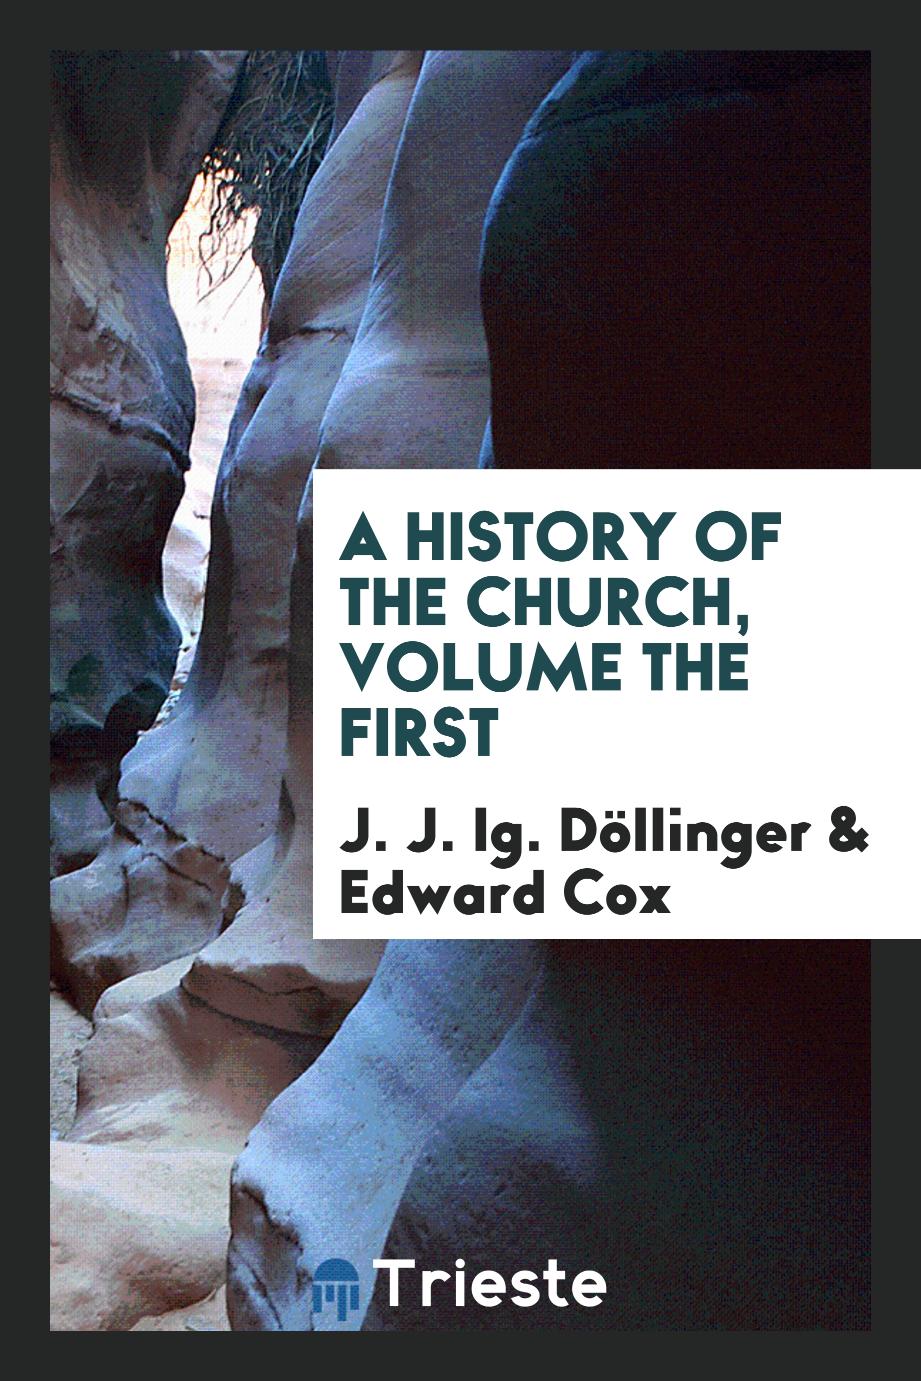 A History of the Church, Volume the First